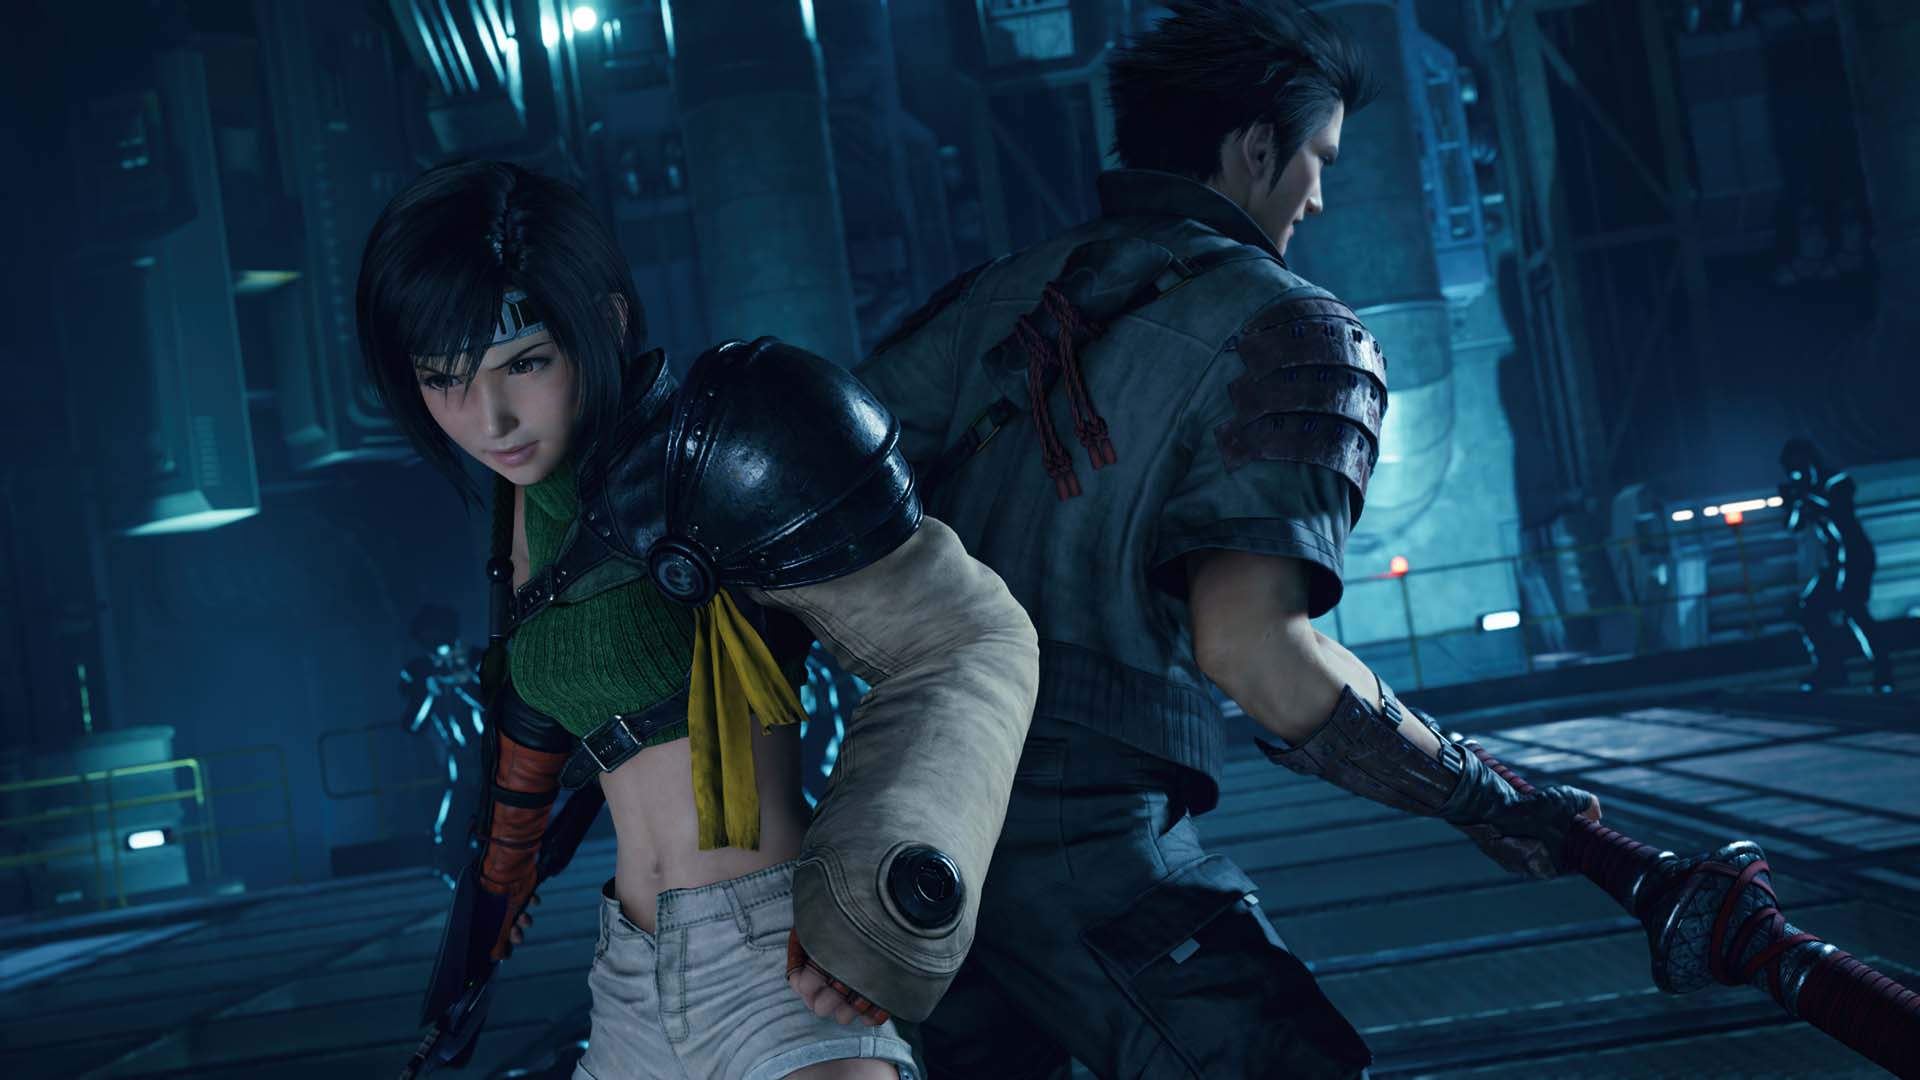 Final Fantasy VII Remake - EPISODE INTERmission (New Story Content Featuring Yuffie) DLC EU PS5 CD Key, $11.29